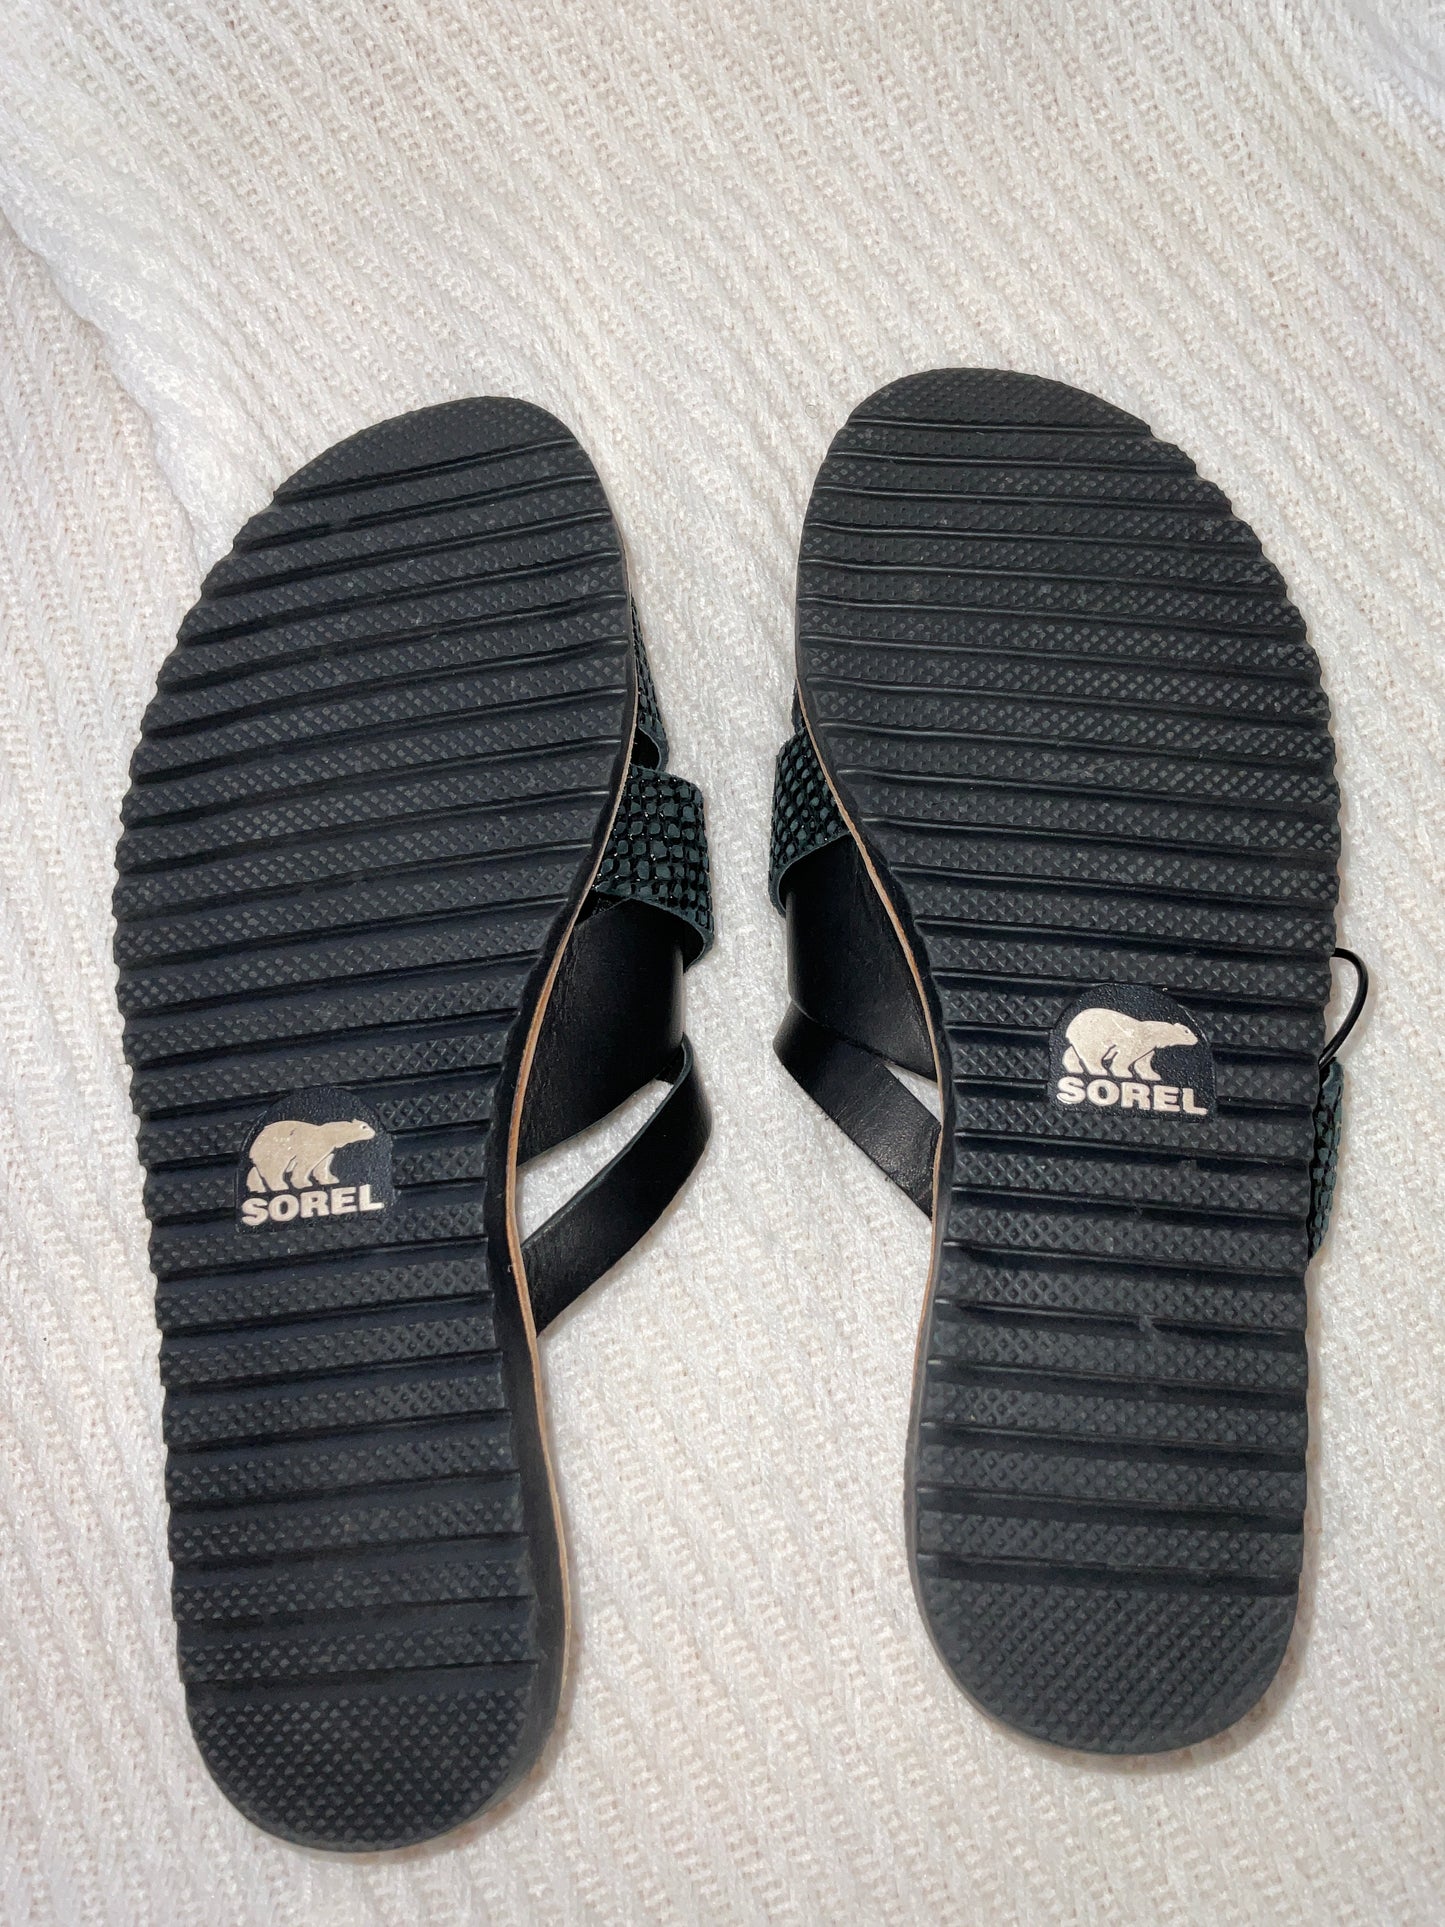 Sandals Flats By Sorel  Size: 8